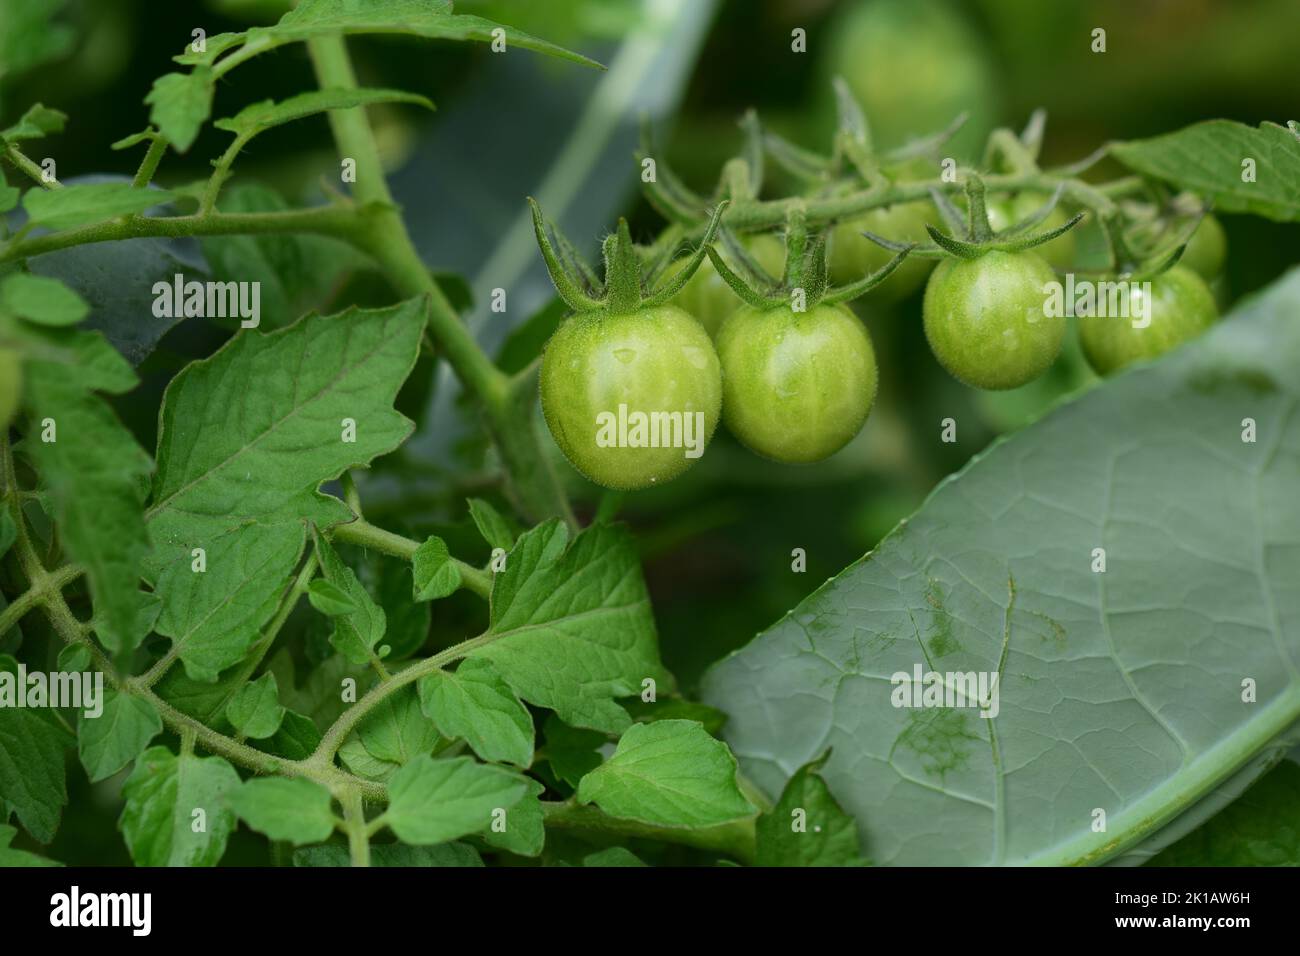 Greesn tomatoes on the bush as a close up Stock Photo